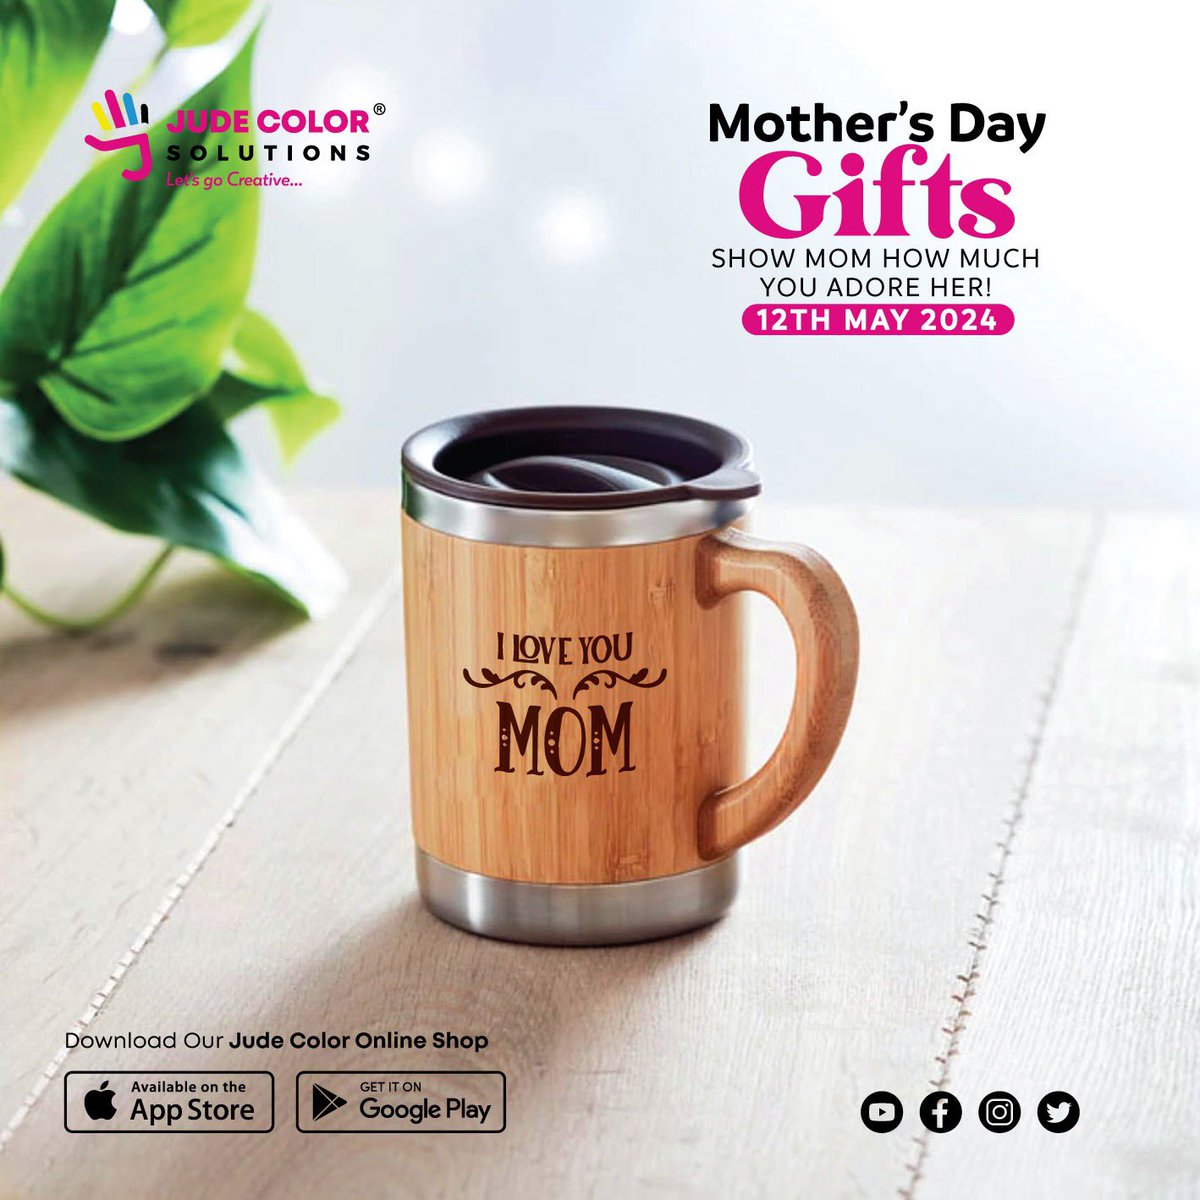 One day to Mother’s Day. Think about a customized gift for that mother figure in your life. It could be your mother, grandma, auntie, sister, friend or wifey. Contact us on 0772459129 or 0200933554 to place your order. #mothersdaygifts #customizedgifts